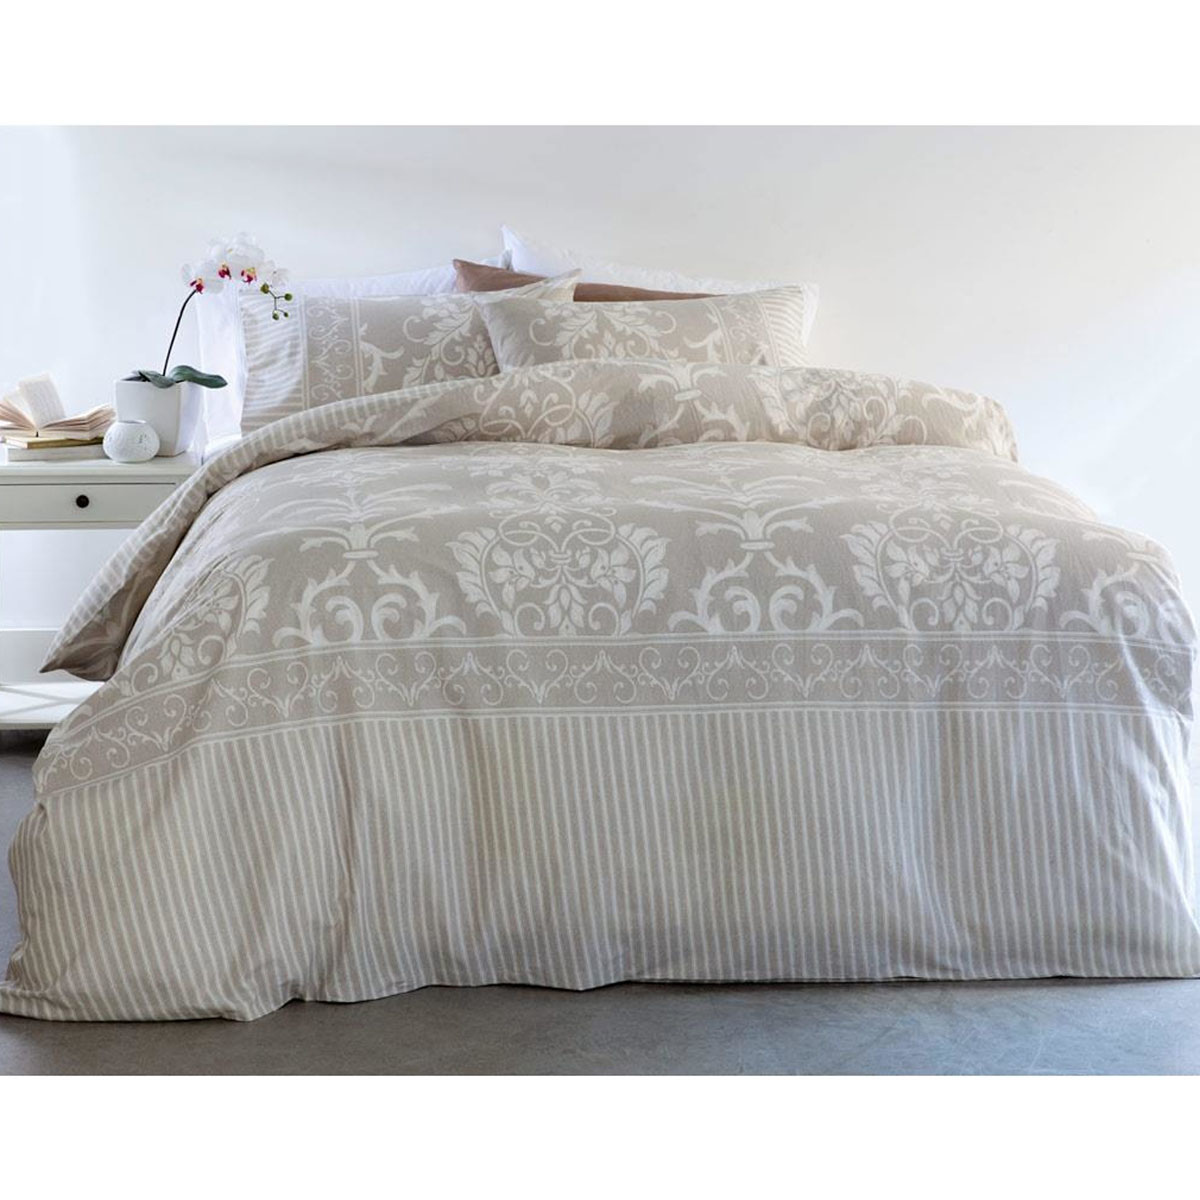 Damask Quilt Cover Set - Double Bed